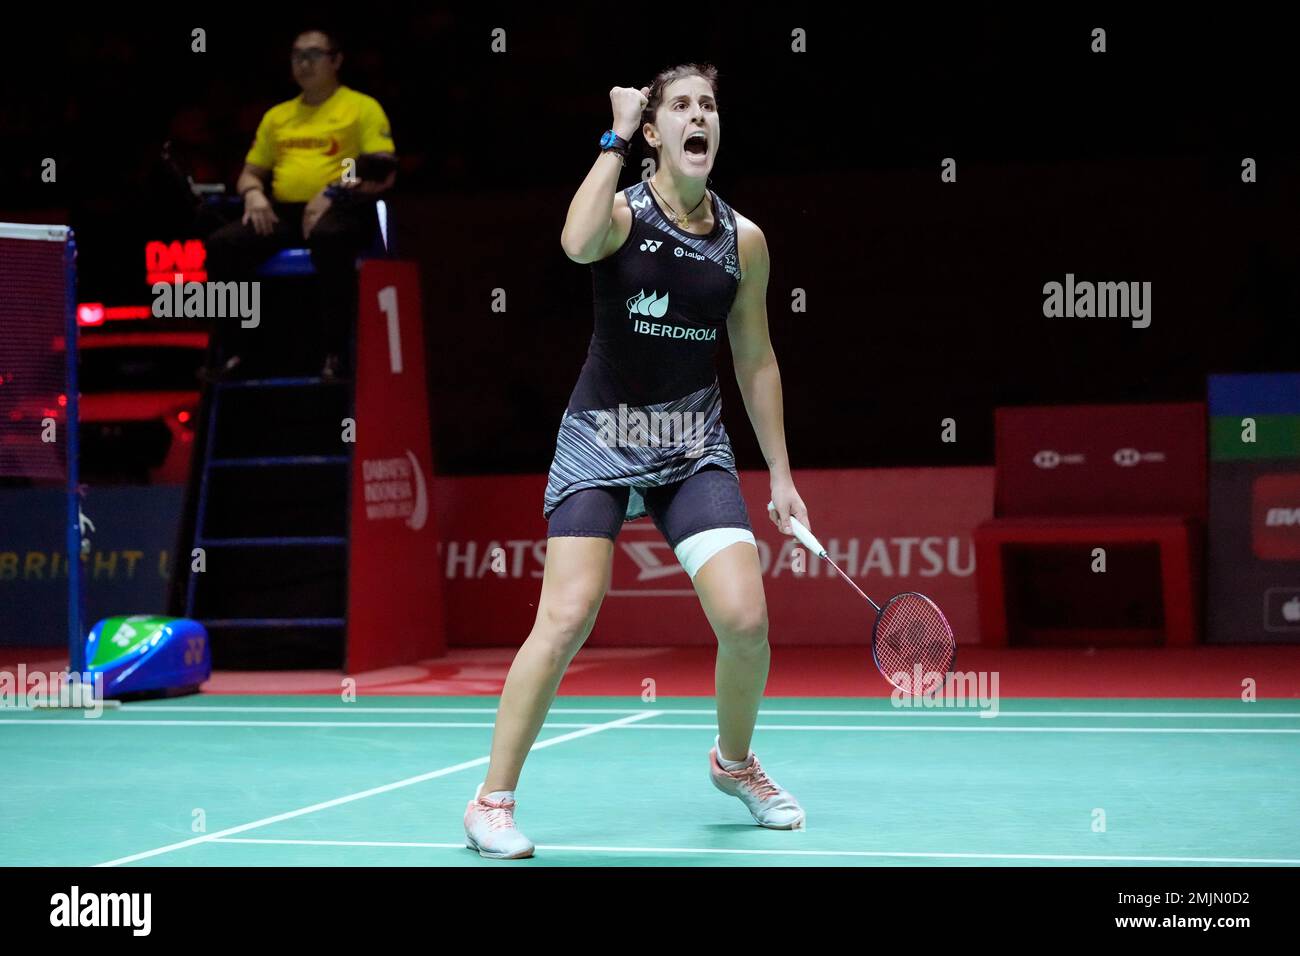 Spains Carolina Marin reacts after winning her semi final round of the womens singles match against Chinas Han Yue in the Indonesia Masters badminton tournament at the Istora Stadium in Jakarta, Indonesia,